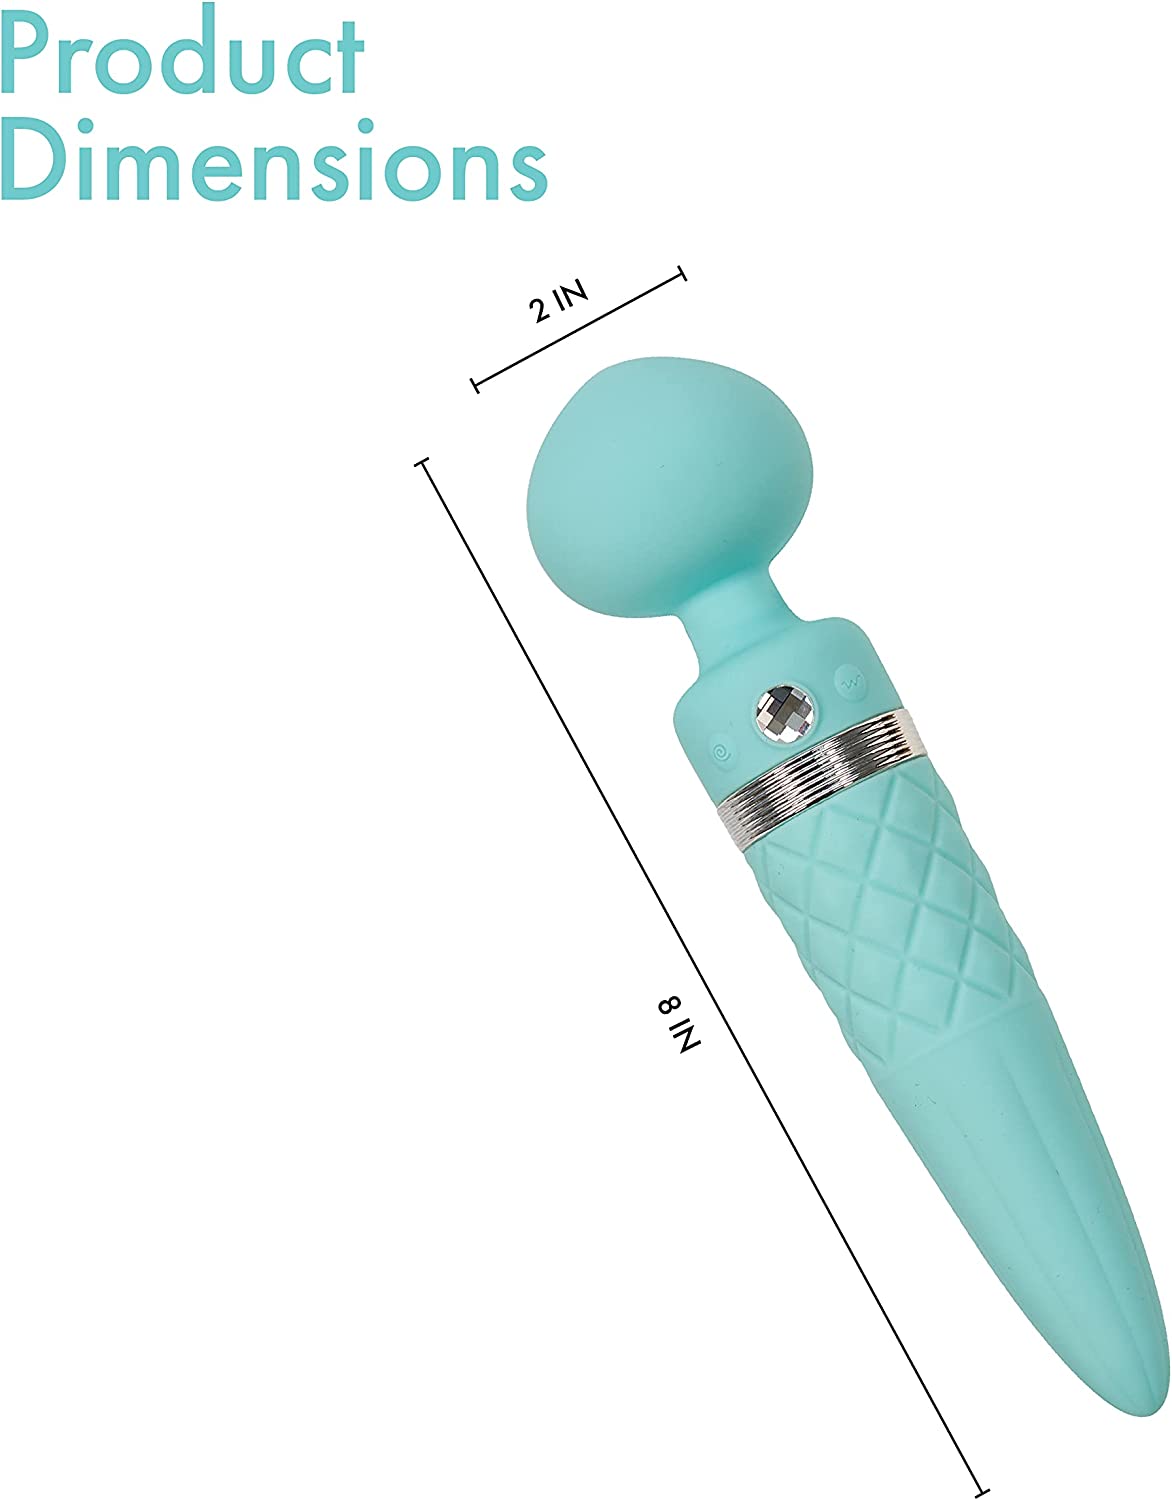 SHOP Pillow Talk Sultry Dual Ended Warming Heated Vibrator Massager | Teal $121.99AUD FREE SHIPPING Australia. Sultry by Pillow Talk has a smooth rounded head and provides powerful vibrations. It has a tapered insertable handle that rotates 360 degrees for incredible G-spot stimulation. The rotating shaft of Sultry also offers a premium warming feature for added comfort and realism. 